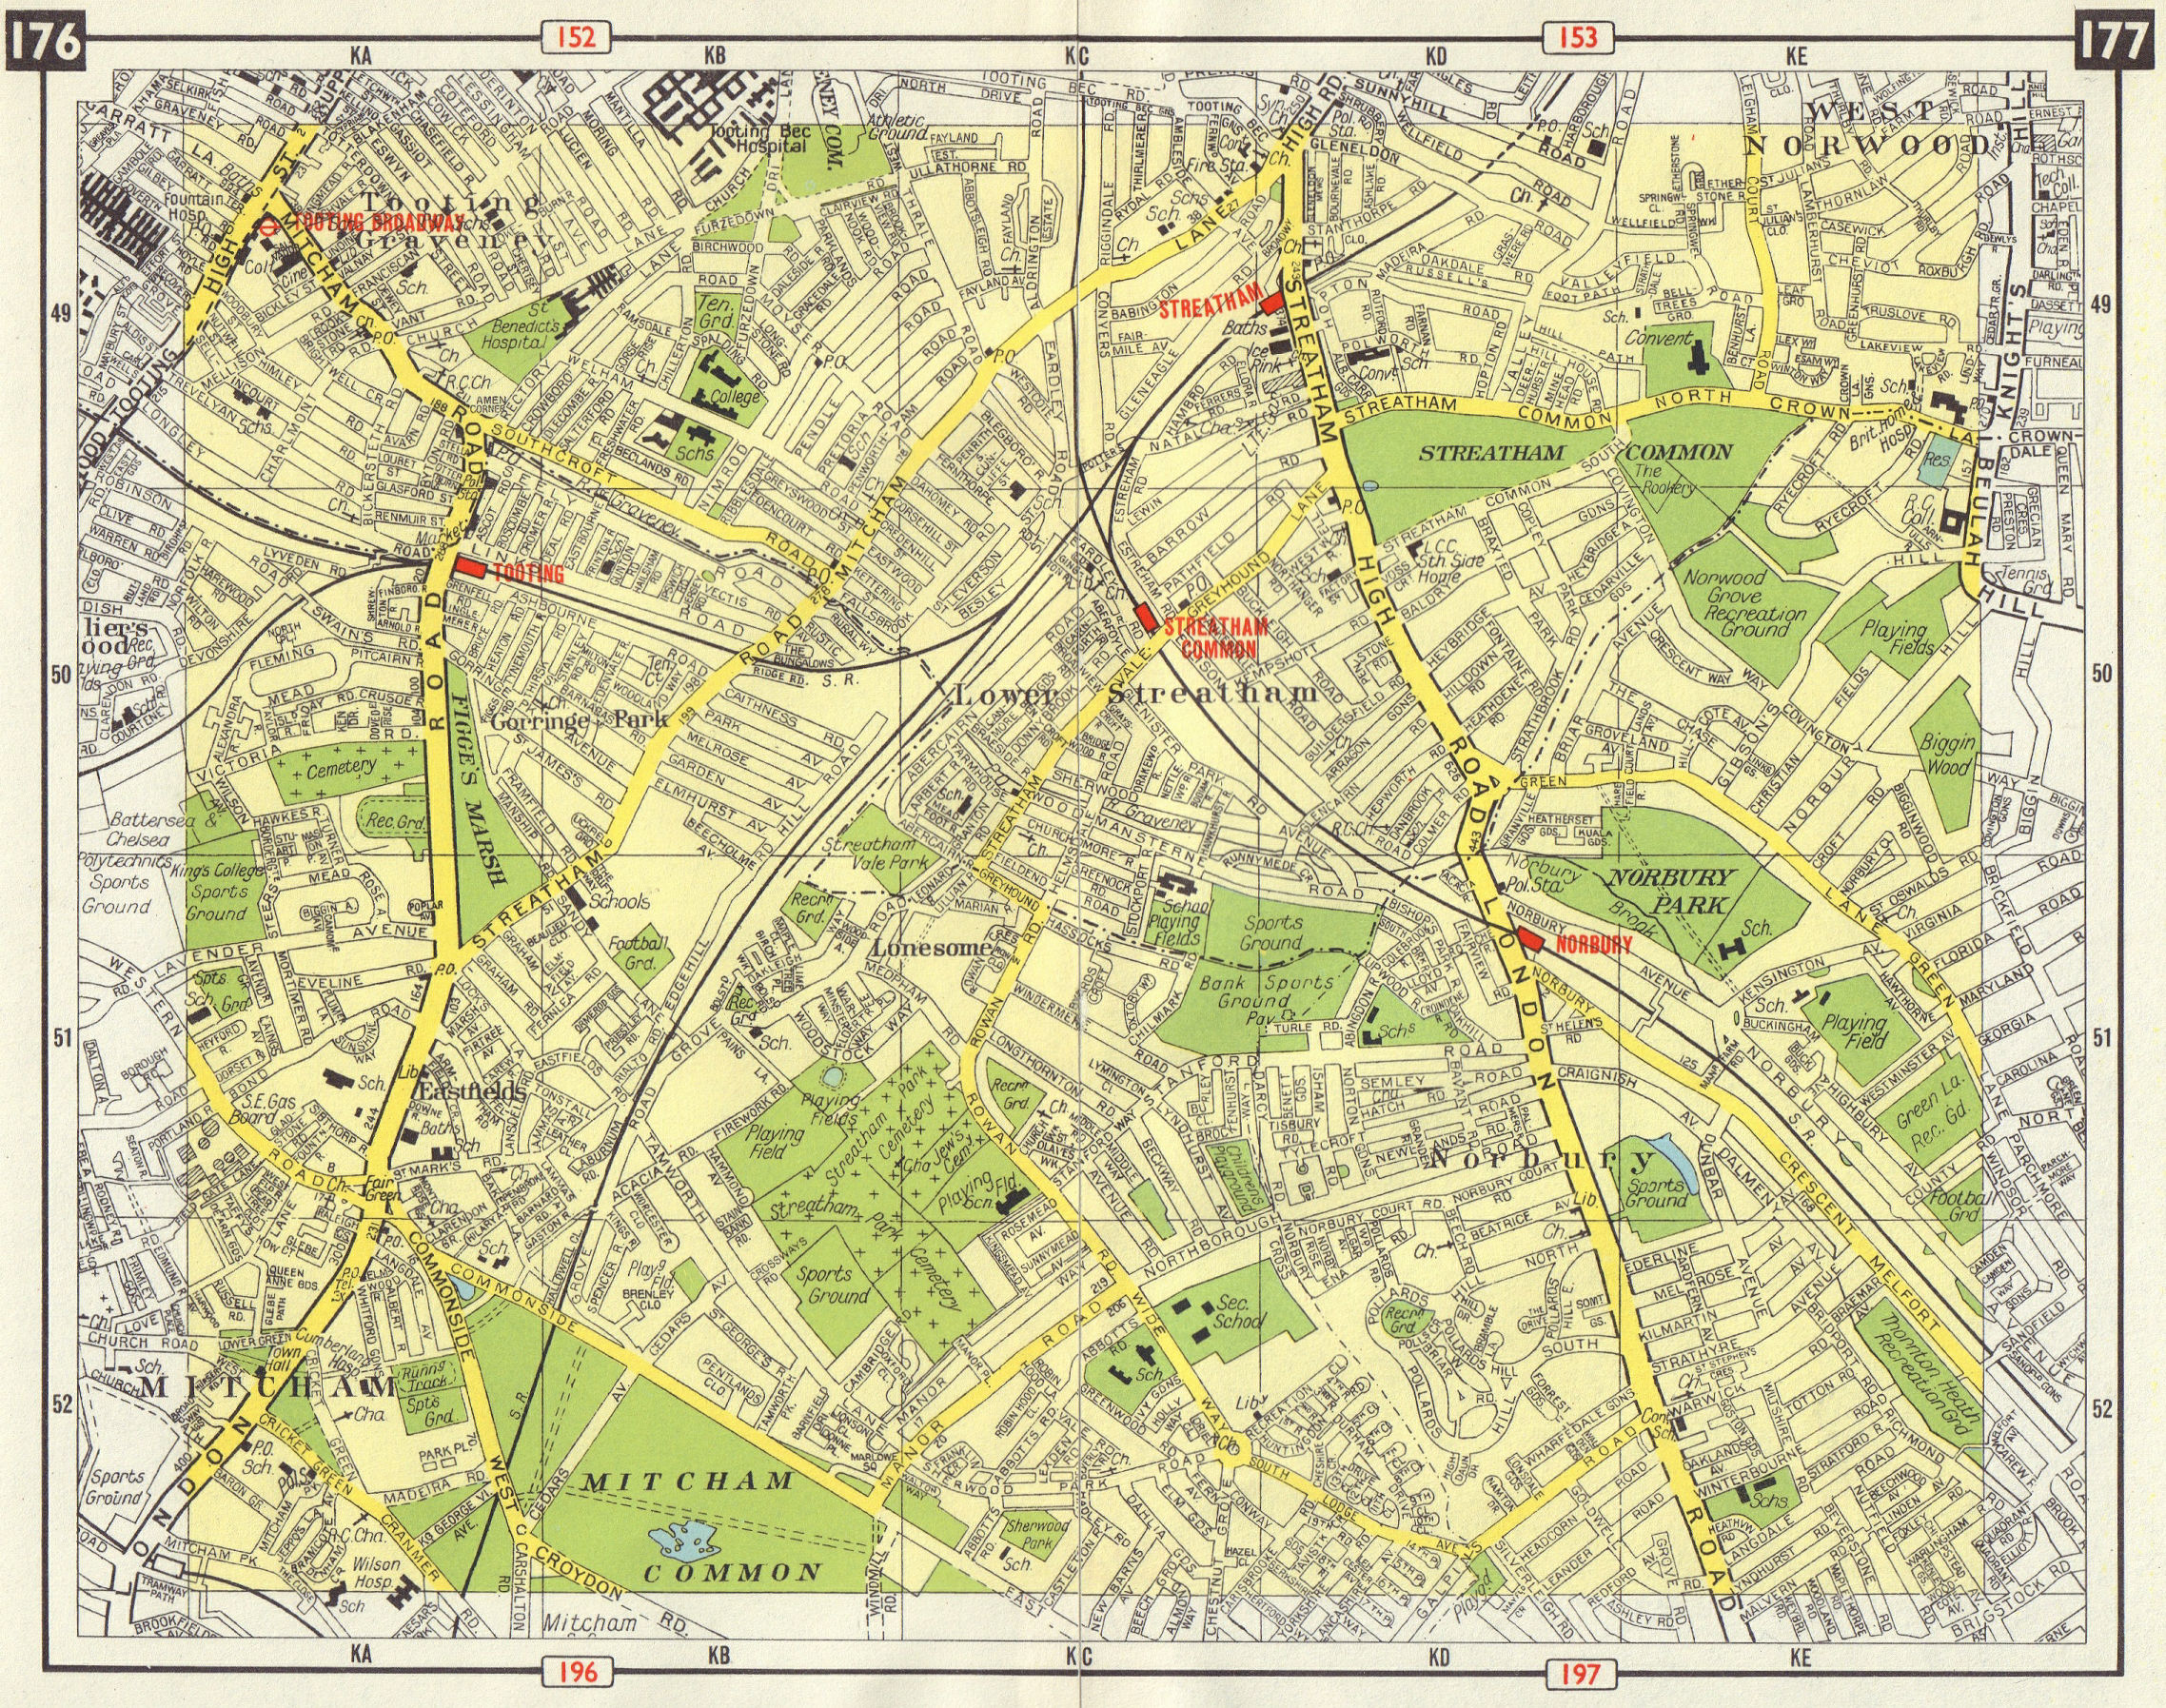 S LONDON Mitcham Tooting Streatham West Norwood Norbury Eastfields 1965 map